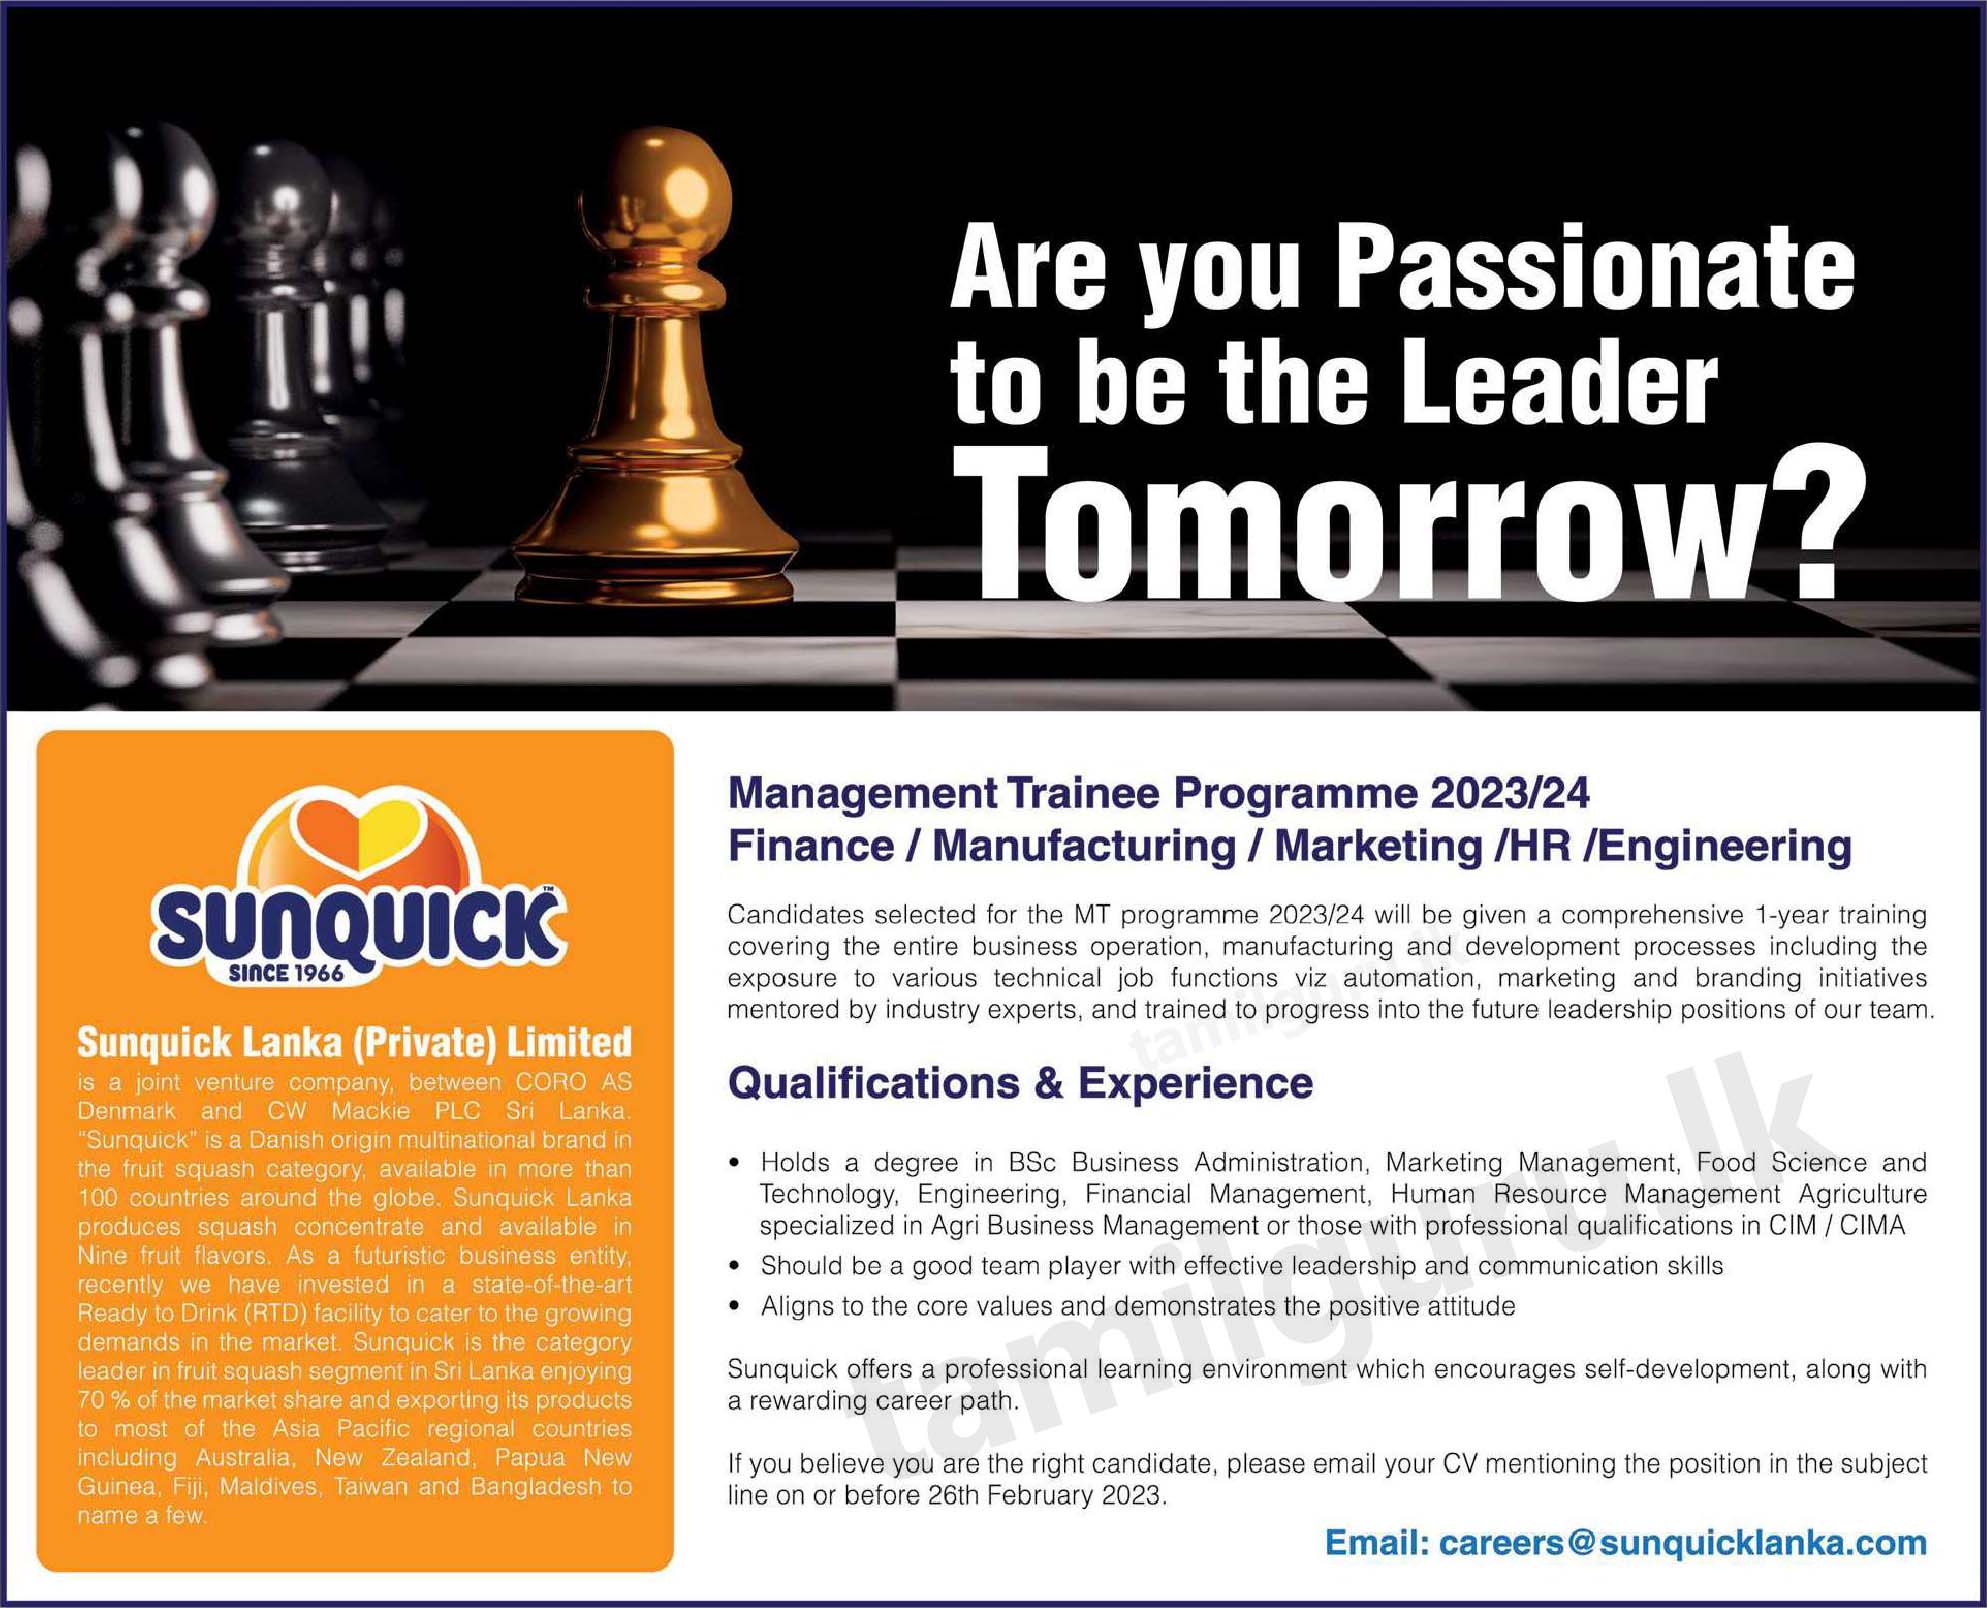 Calling Applications for Management Trainee Programme (Finance / Manufacturing / Marketing / HR / Engineering) - 2023/2024 at the Sunquick Lanka (Private) Limited